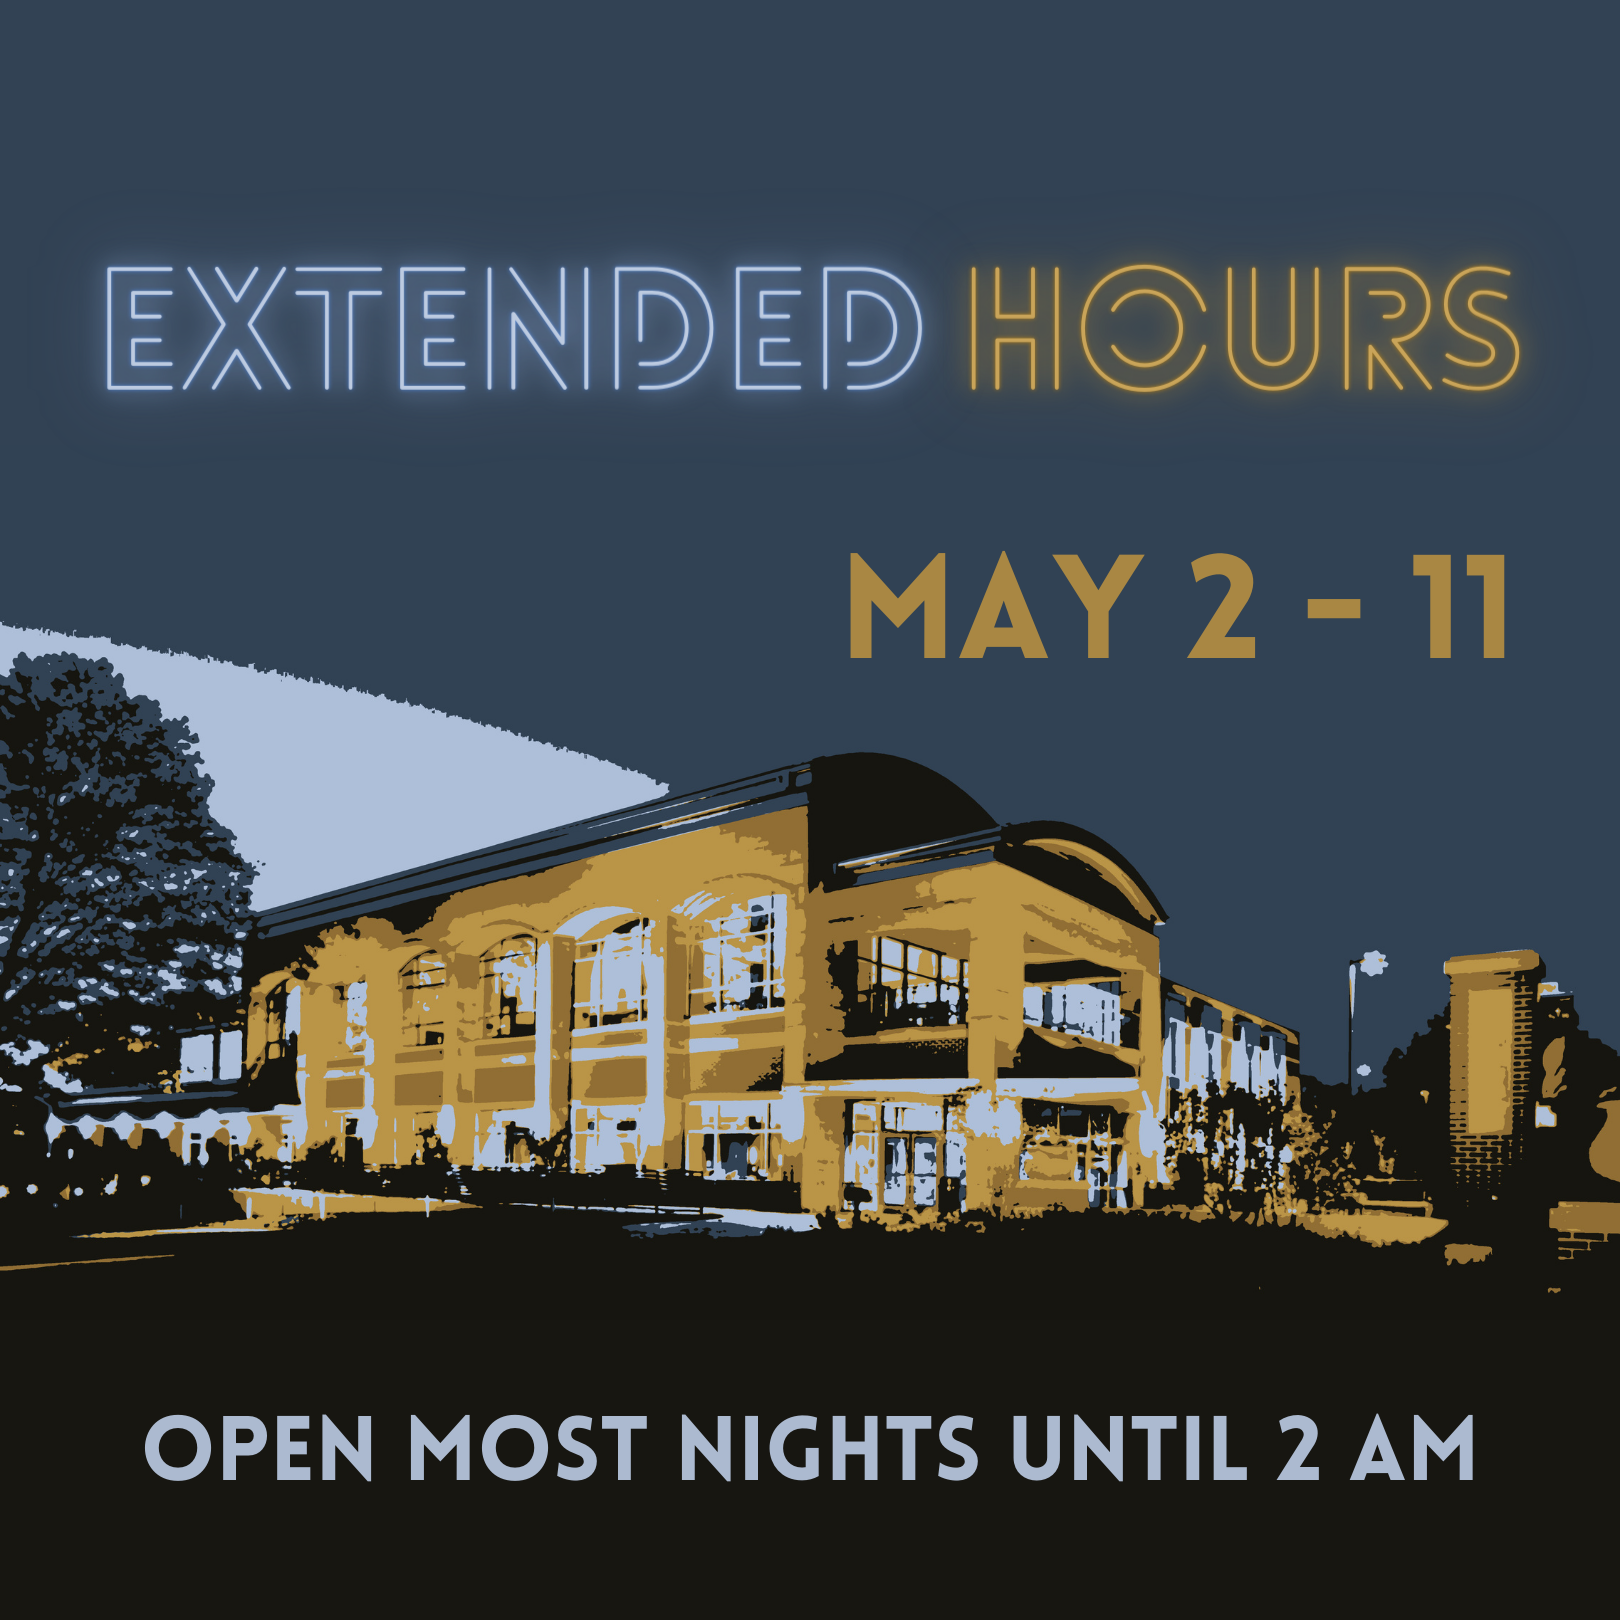 Extended Hours -- May 2 - 11  -- open most nights until 2 am